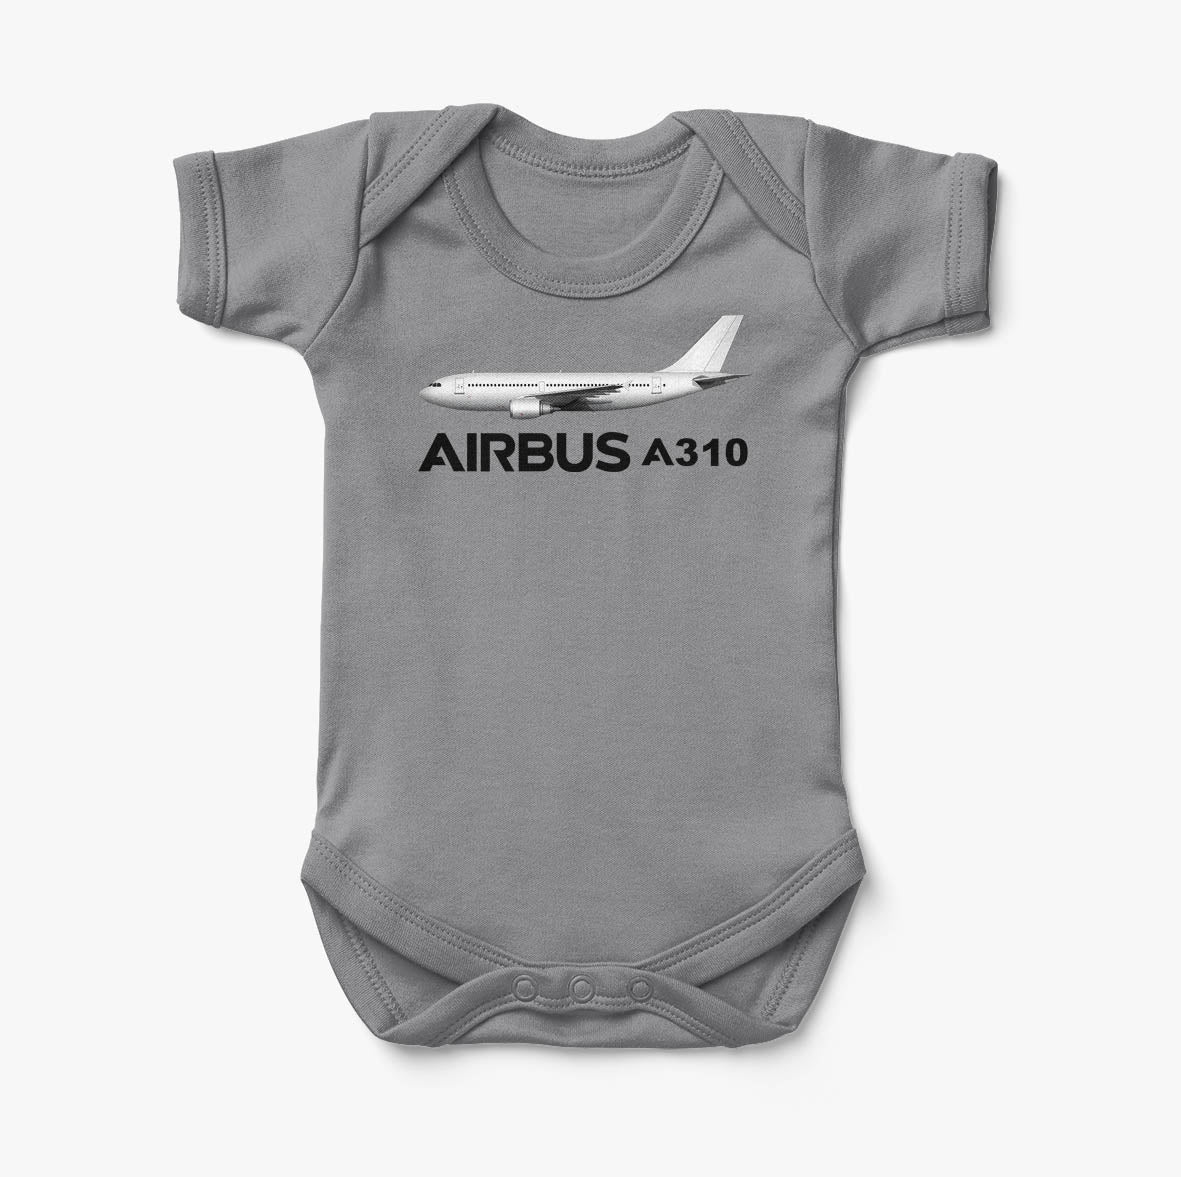 The Airbus A310 Designed Baby Bodysuits